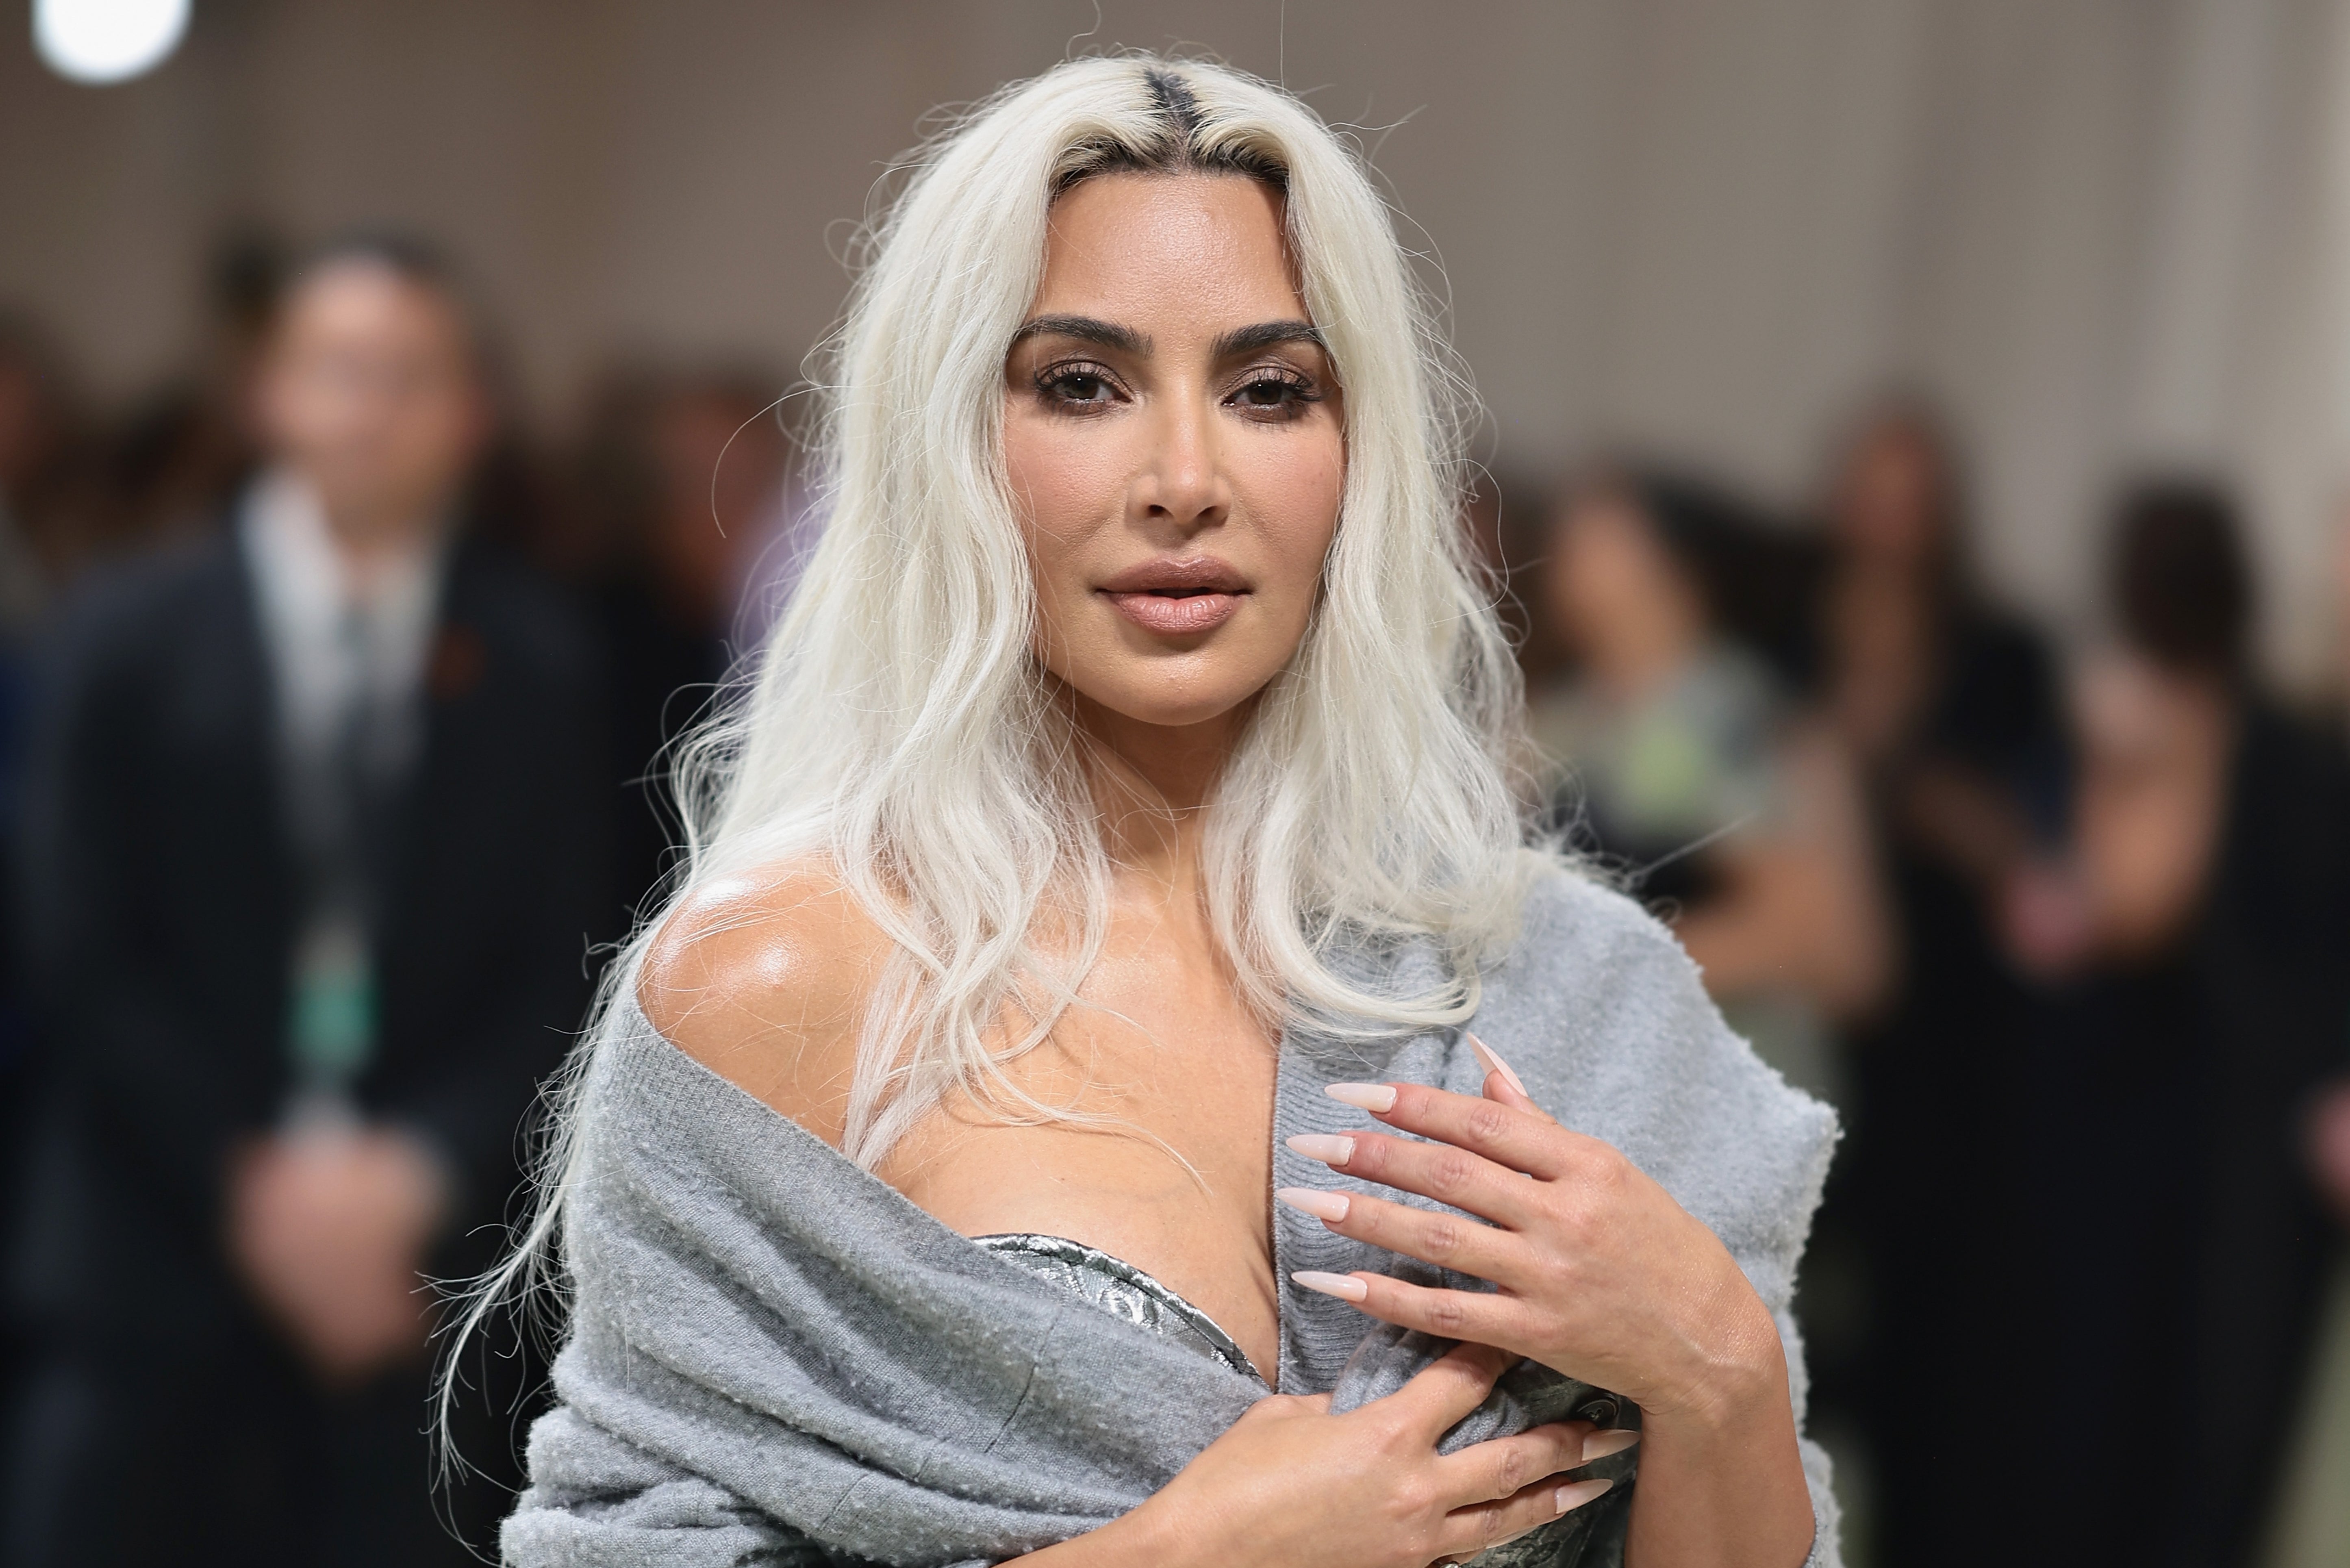 Kim Kardashian has come under fire for claiming that she only has ‘about 10 years where I still look good’